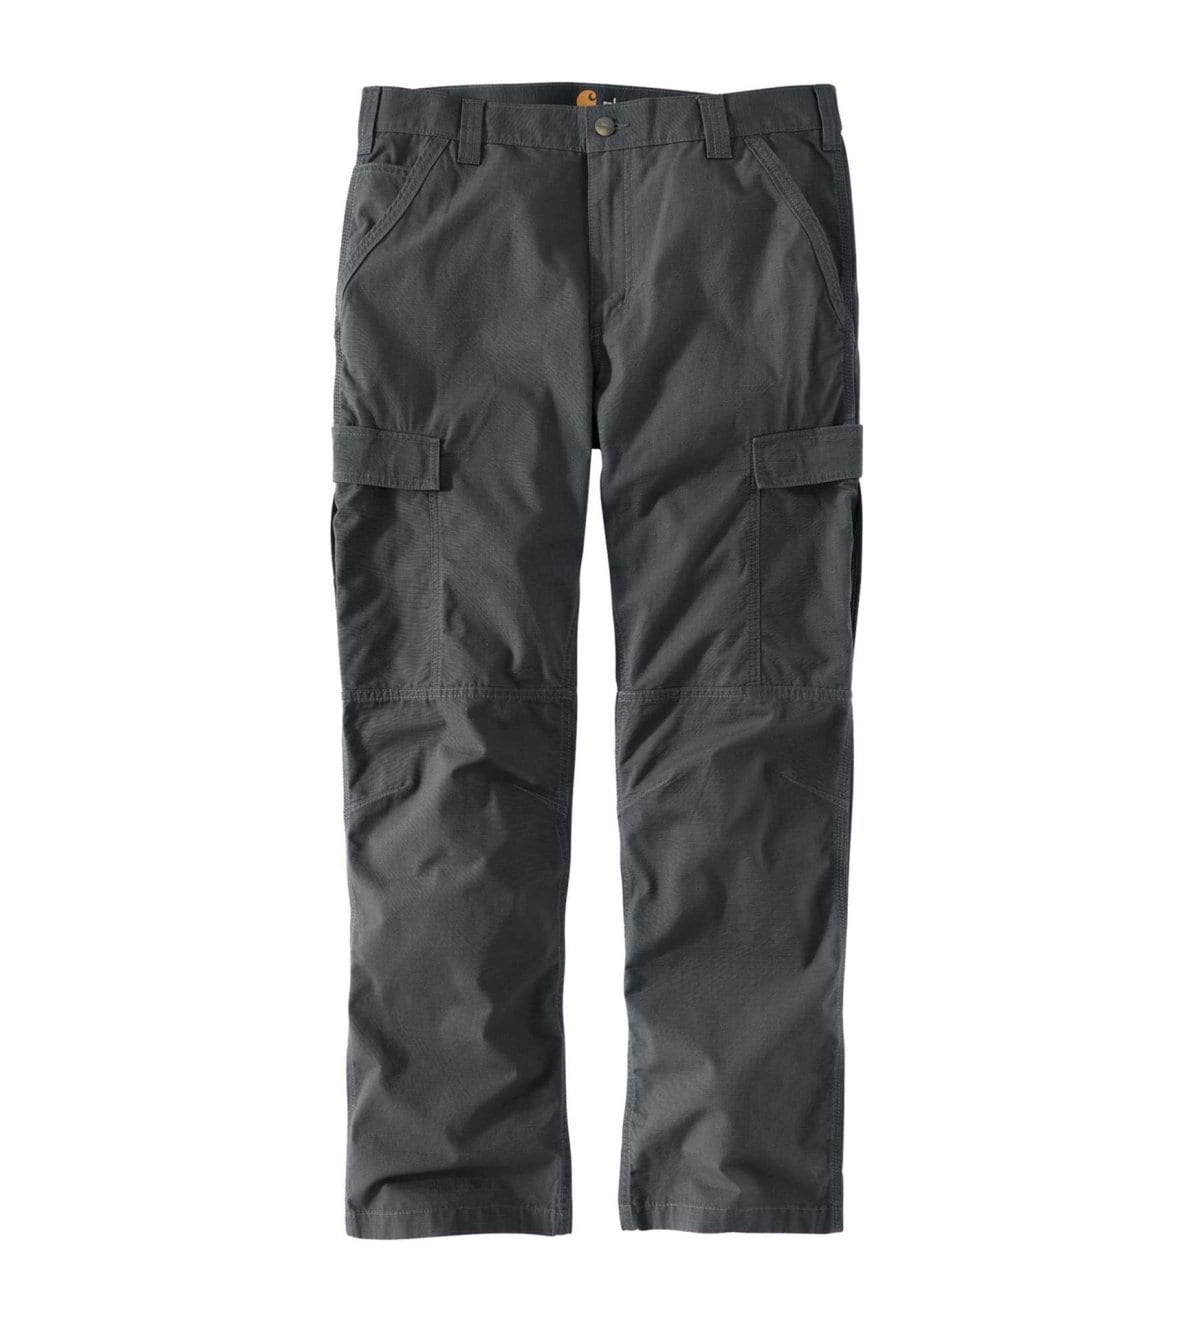 0014318  carhartt 104200 force ripstop cargo work pant shadow